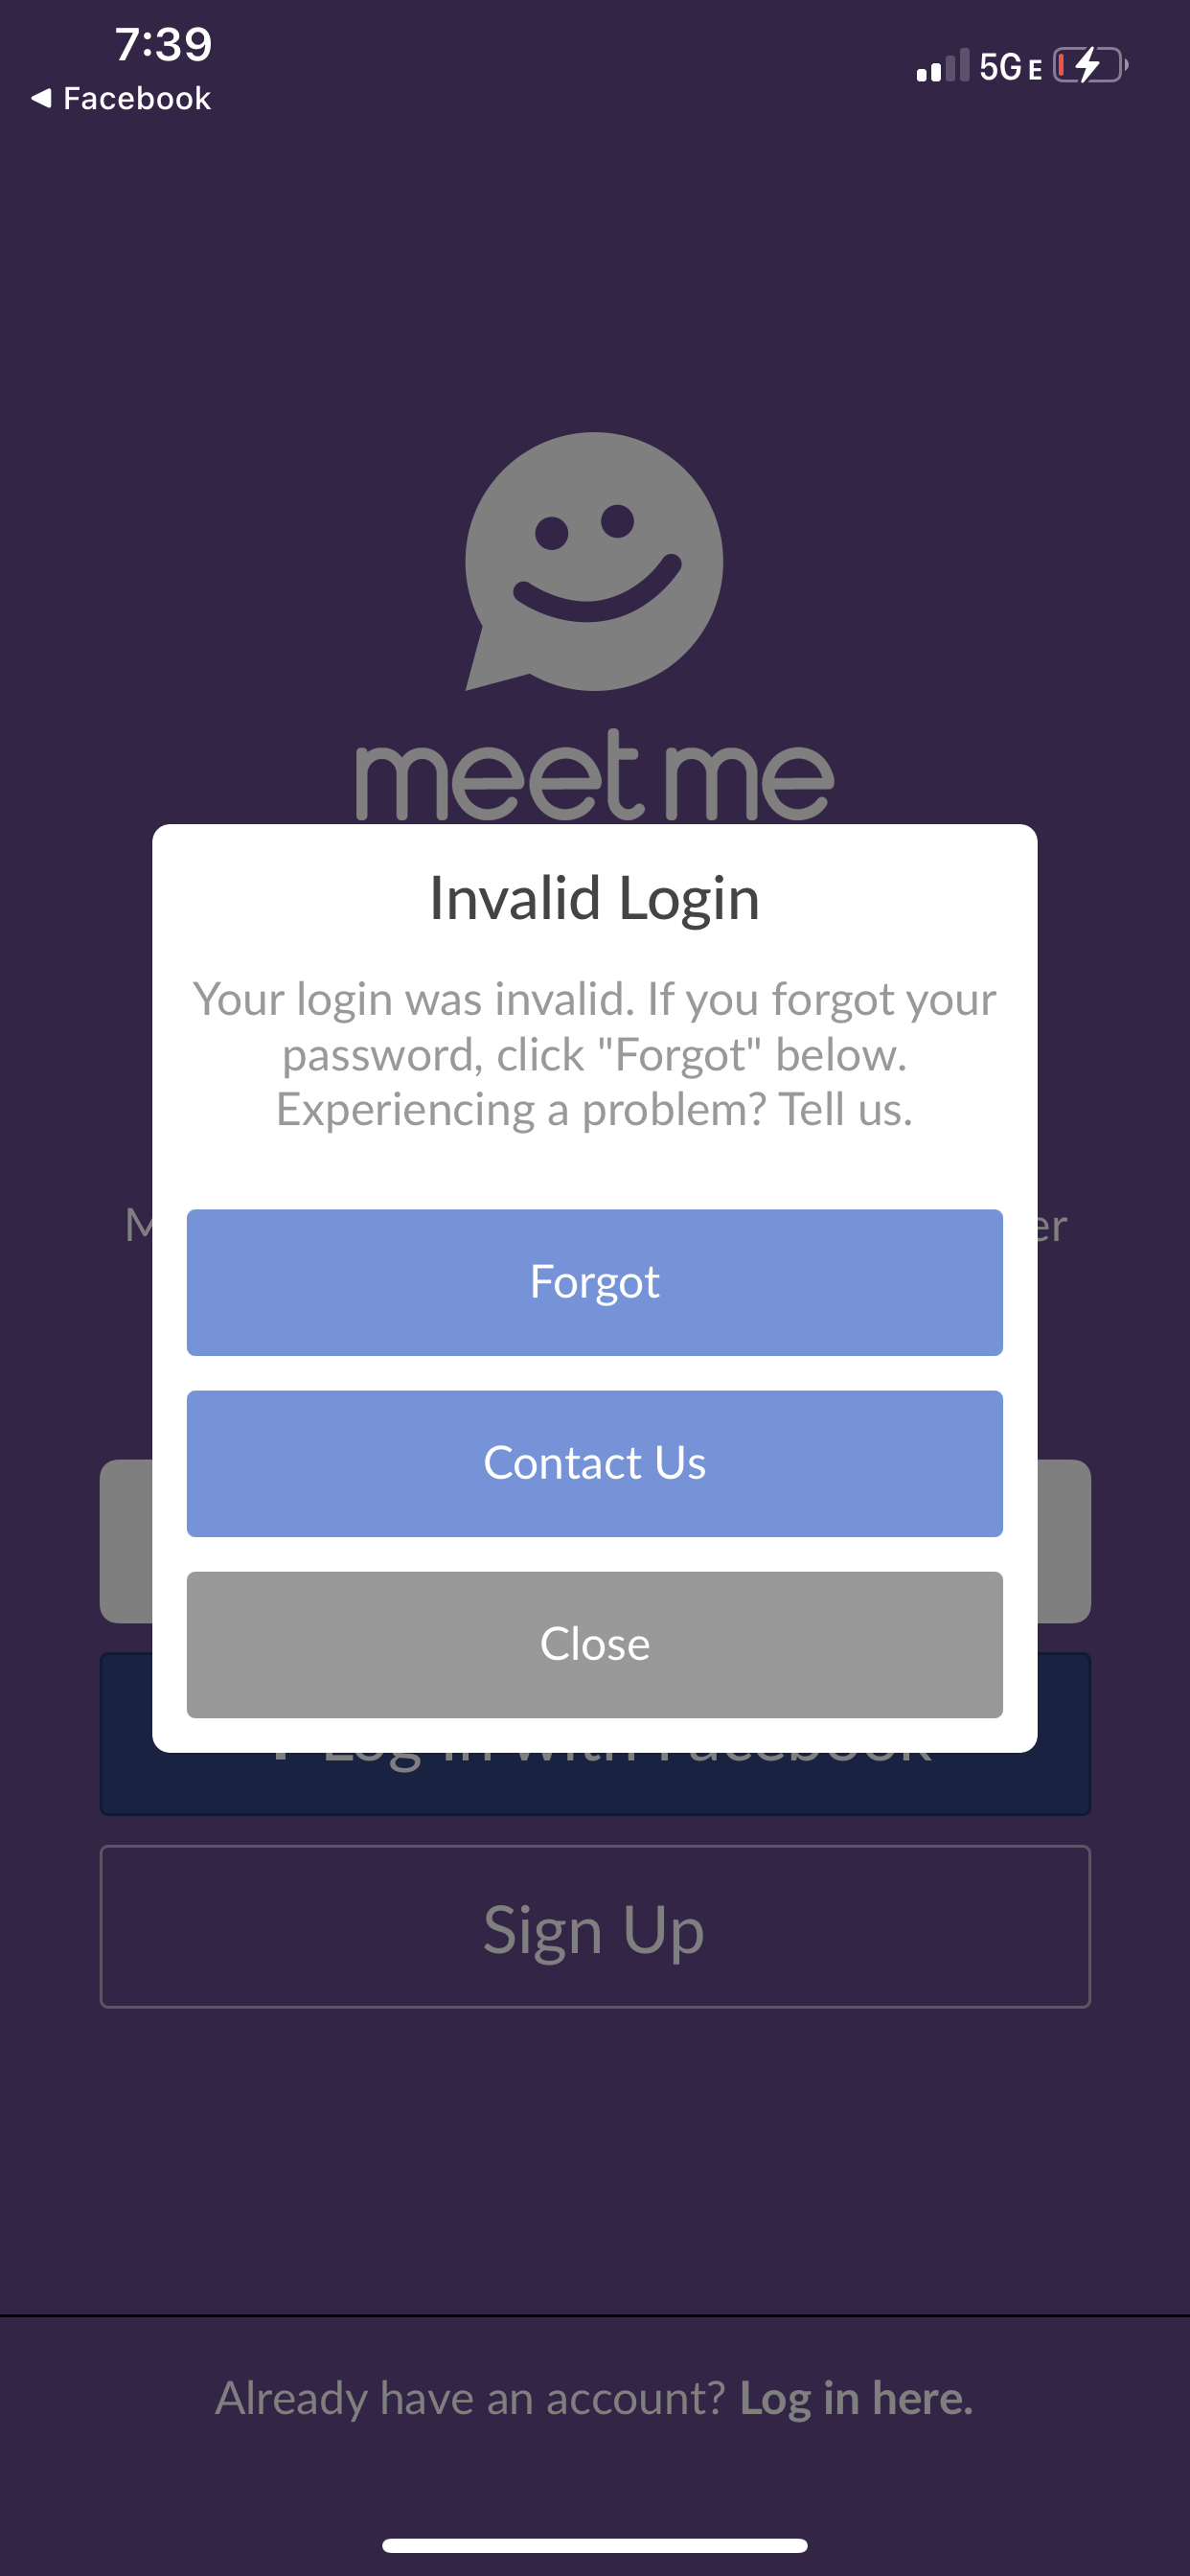 Meetme mobile sign in